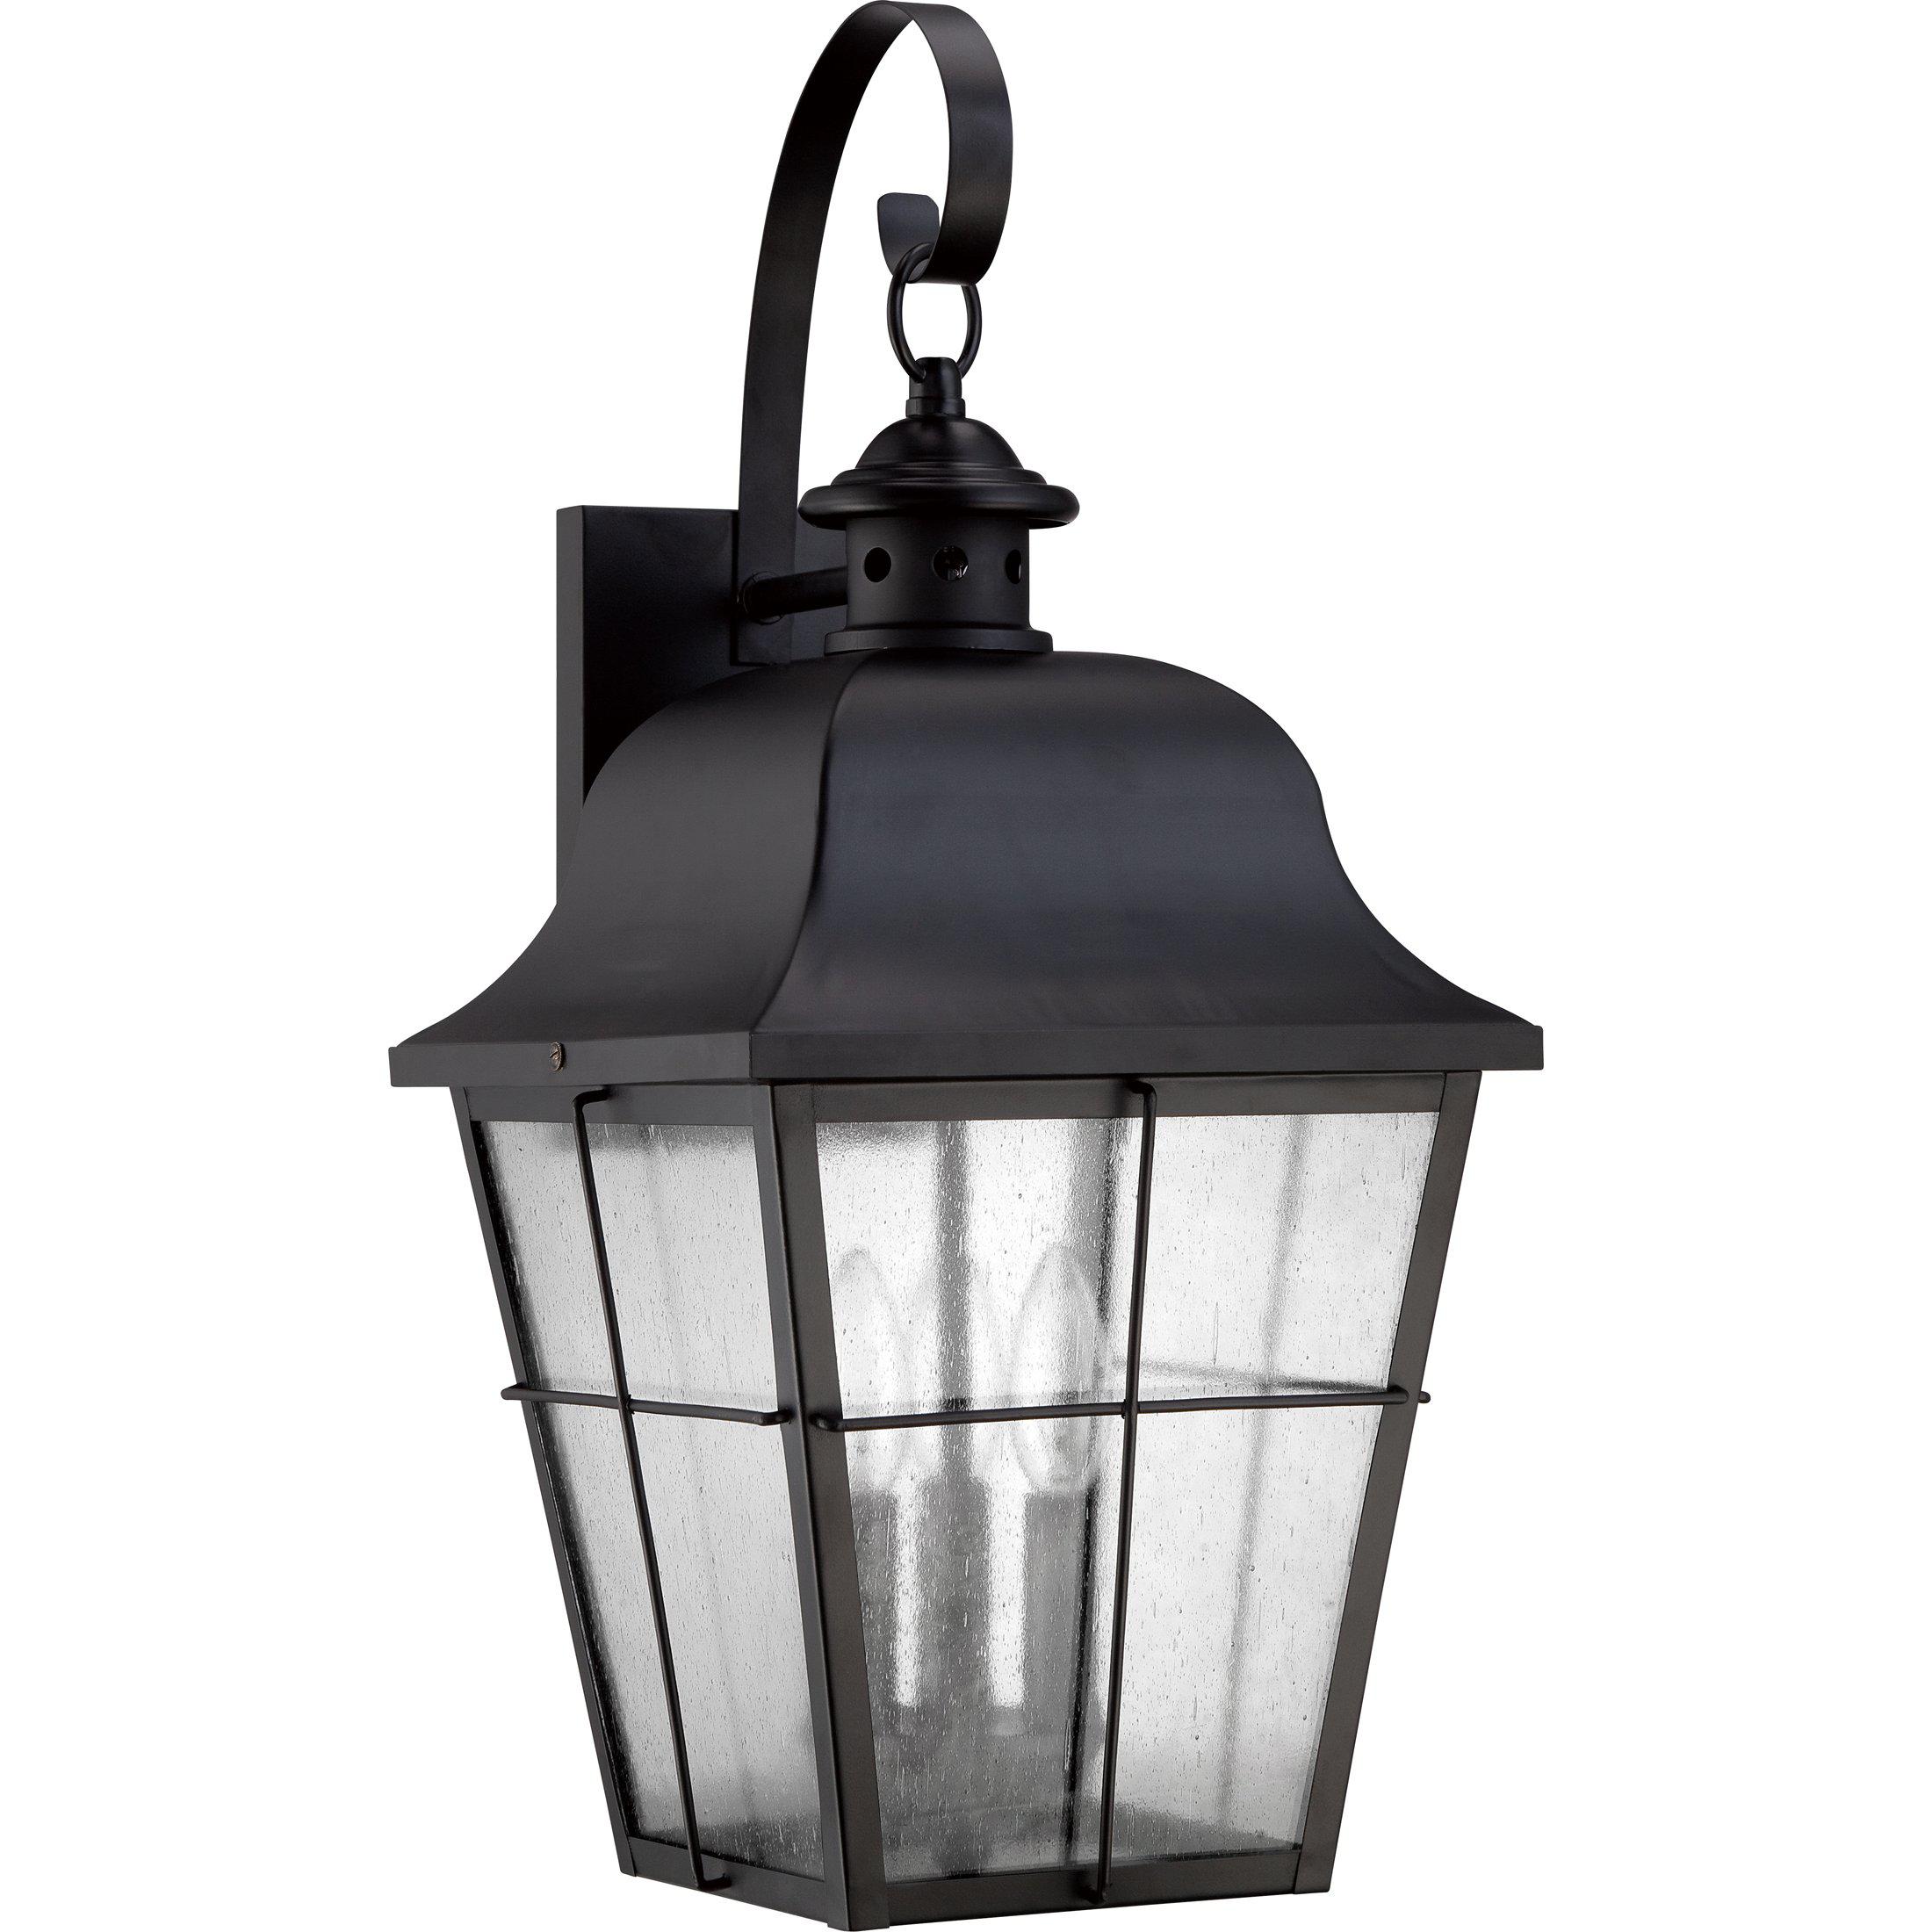 Quoizel  Millhouse Outdoor Lantern, Large Outdoor l Wall Quoizel   